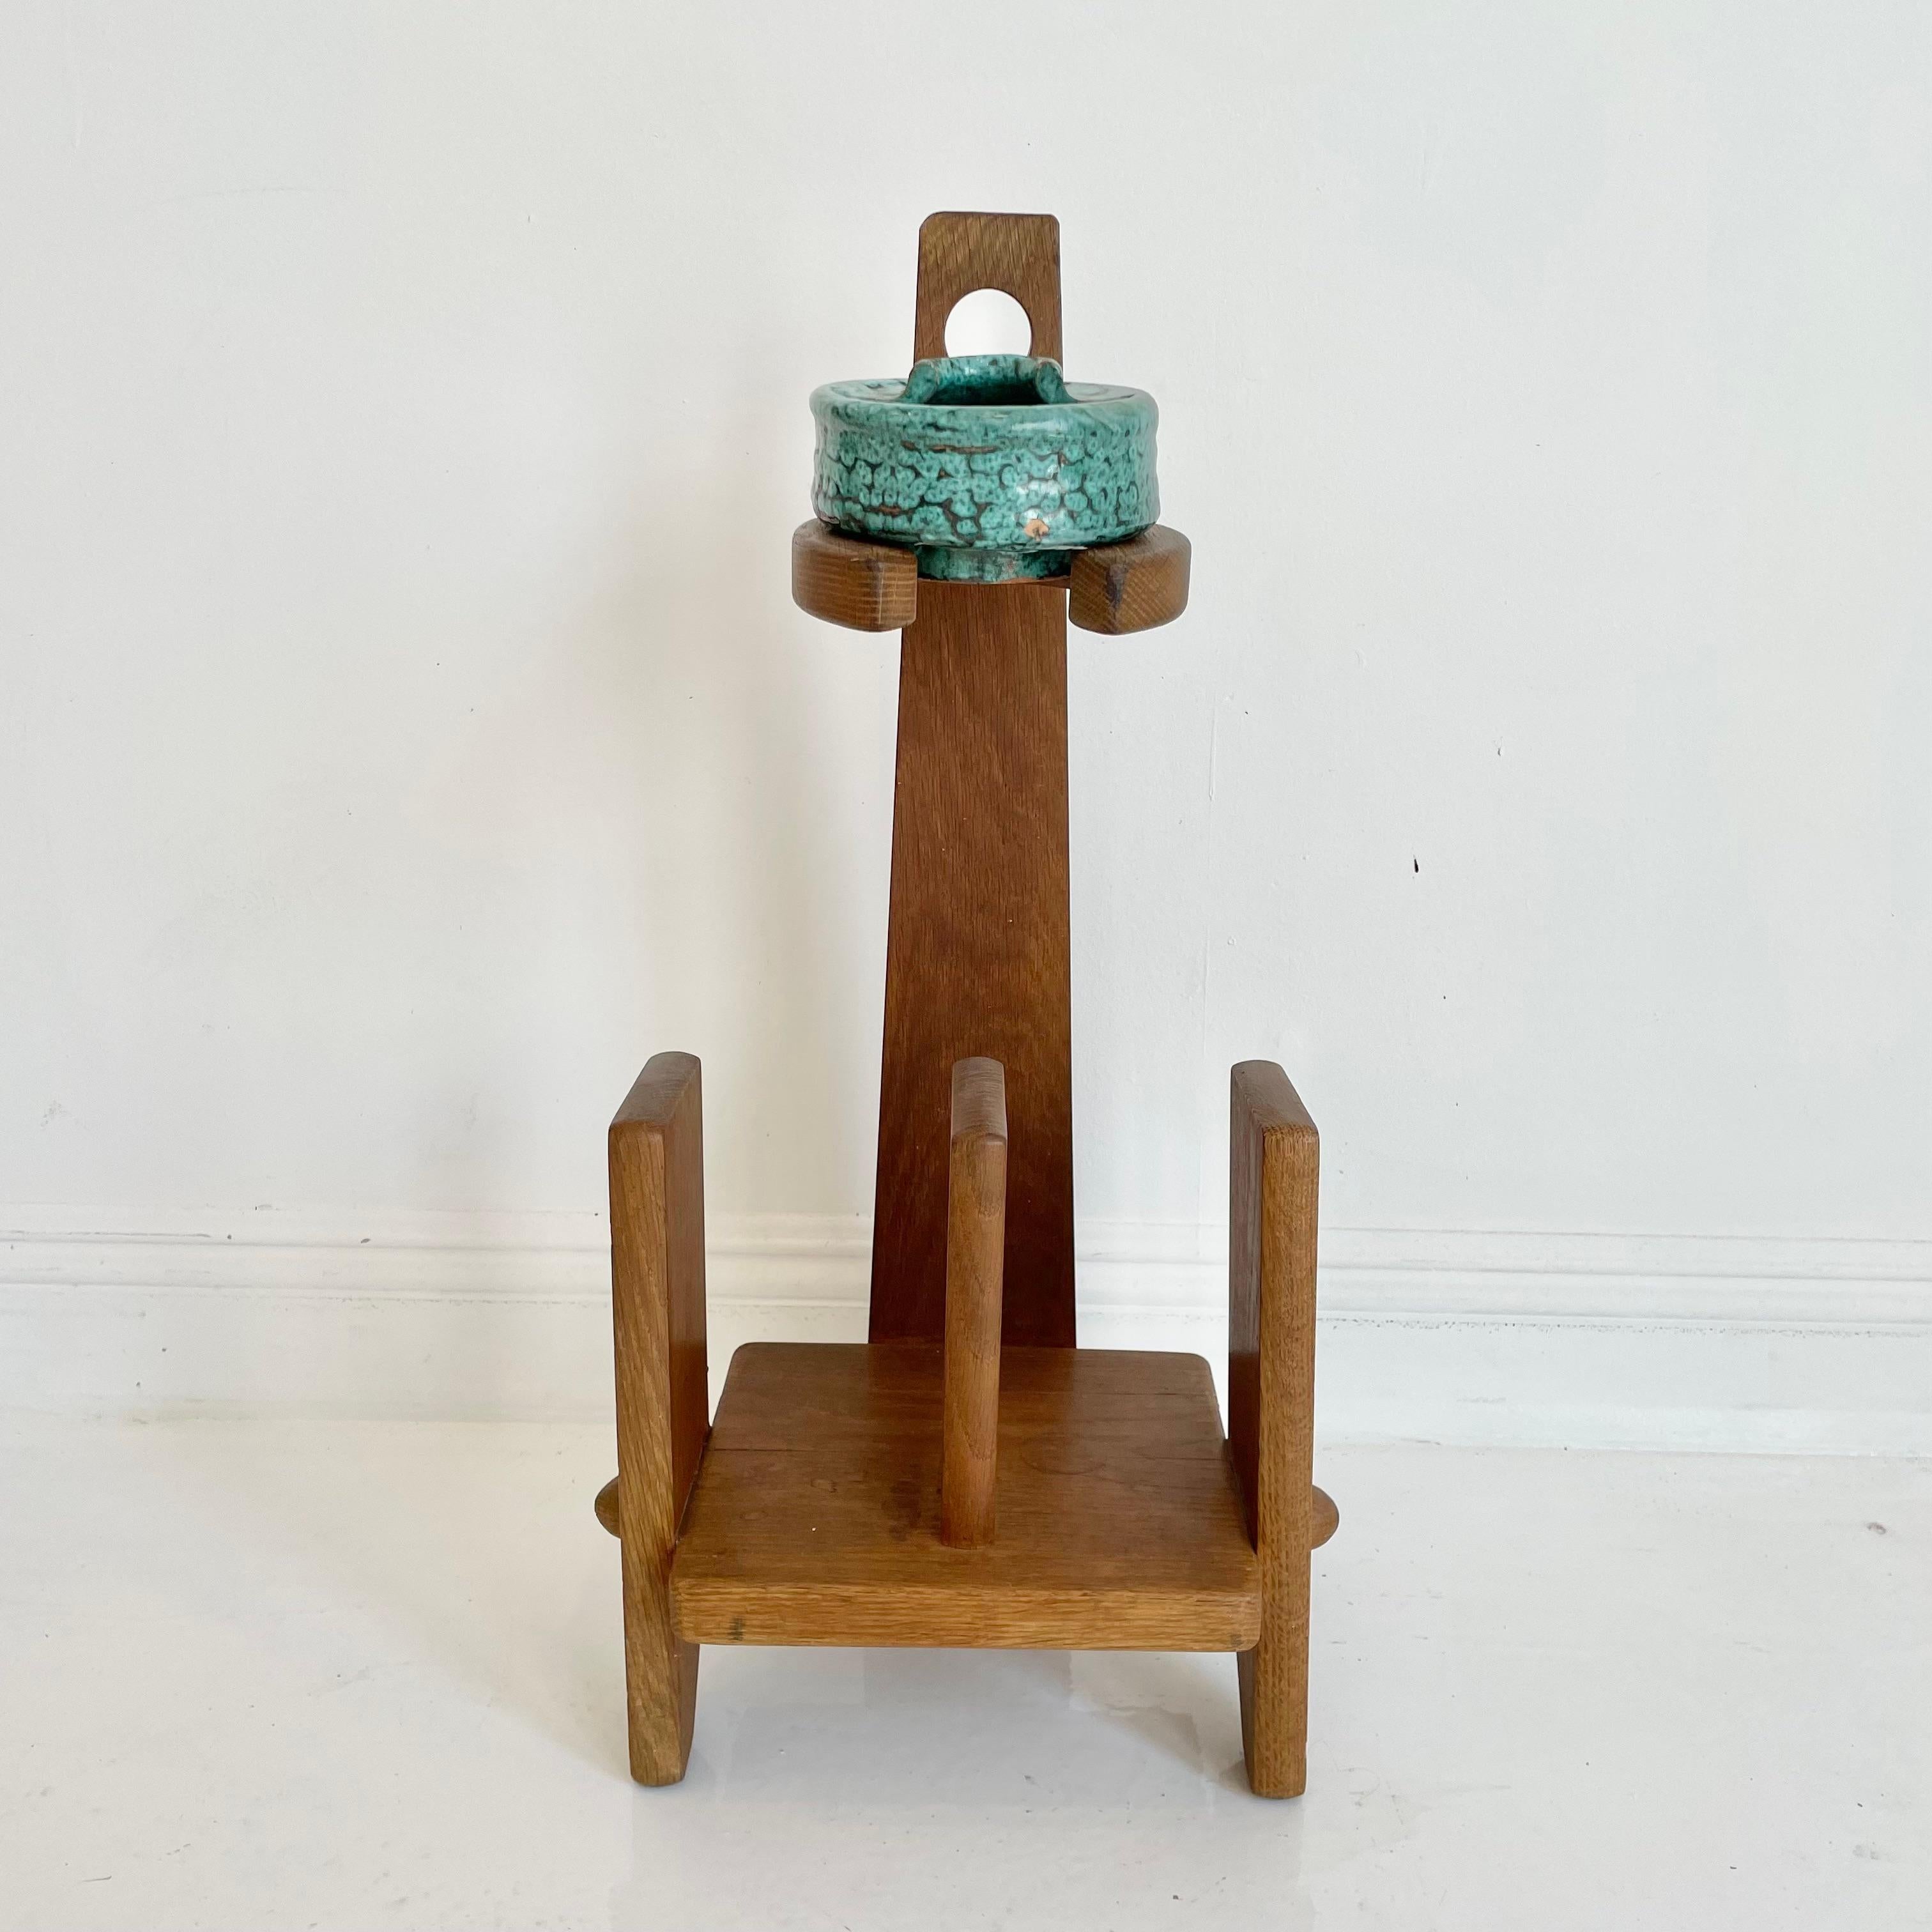 Stunning French magazine rack by designers Guillerme et Chambron. Made of oak. Beautiful, original ceramic ashtray. Very rare find. Gorgeous design. Perfect accessory for a larger Guillerme et Chambron chair, settee or cabinet.